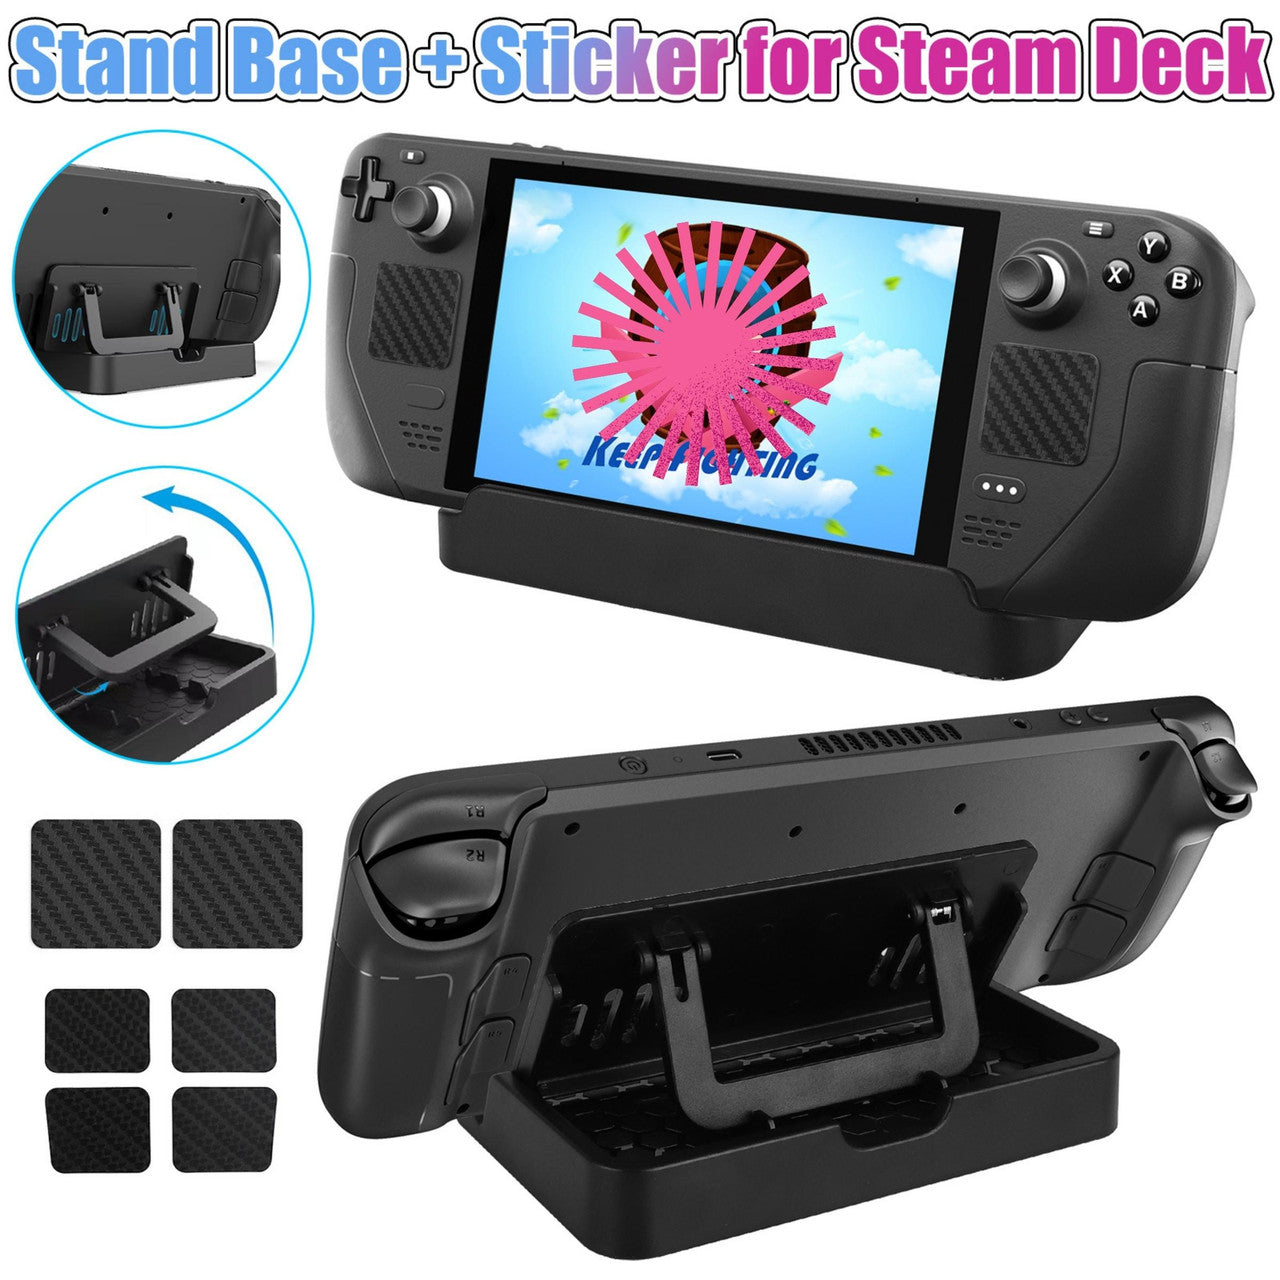 Kick Stand and Stickder Upgrades for Steam Deck - Upgraded Adjustable Foldable Stand Holder Compatible With  Steam Deck Console